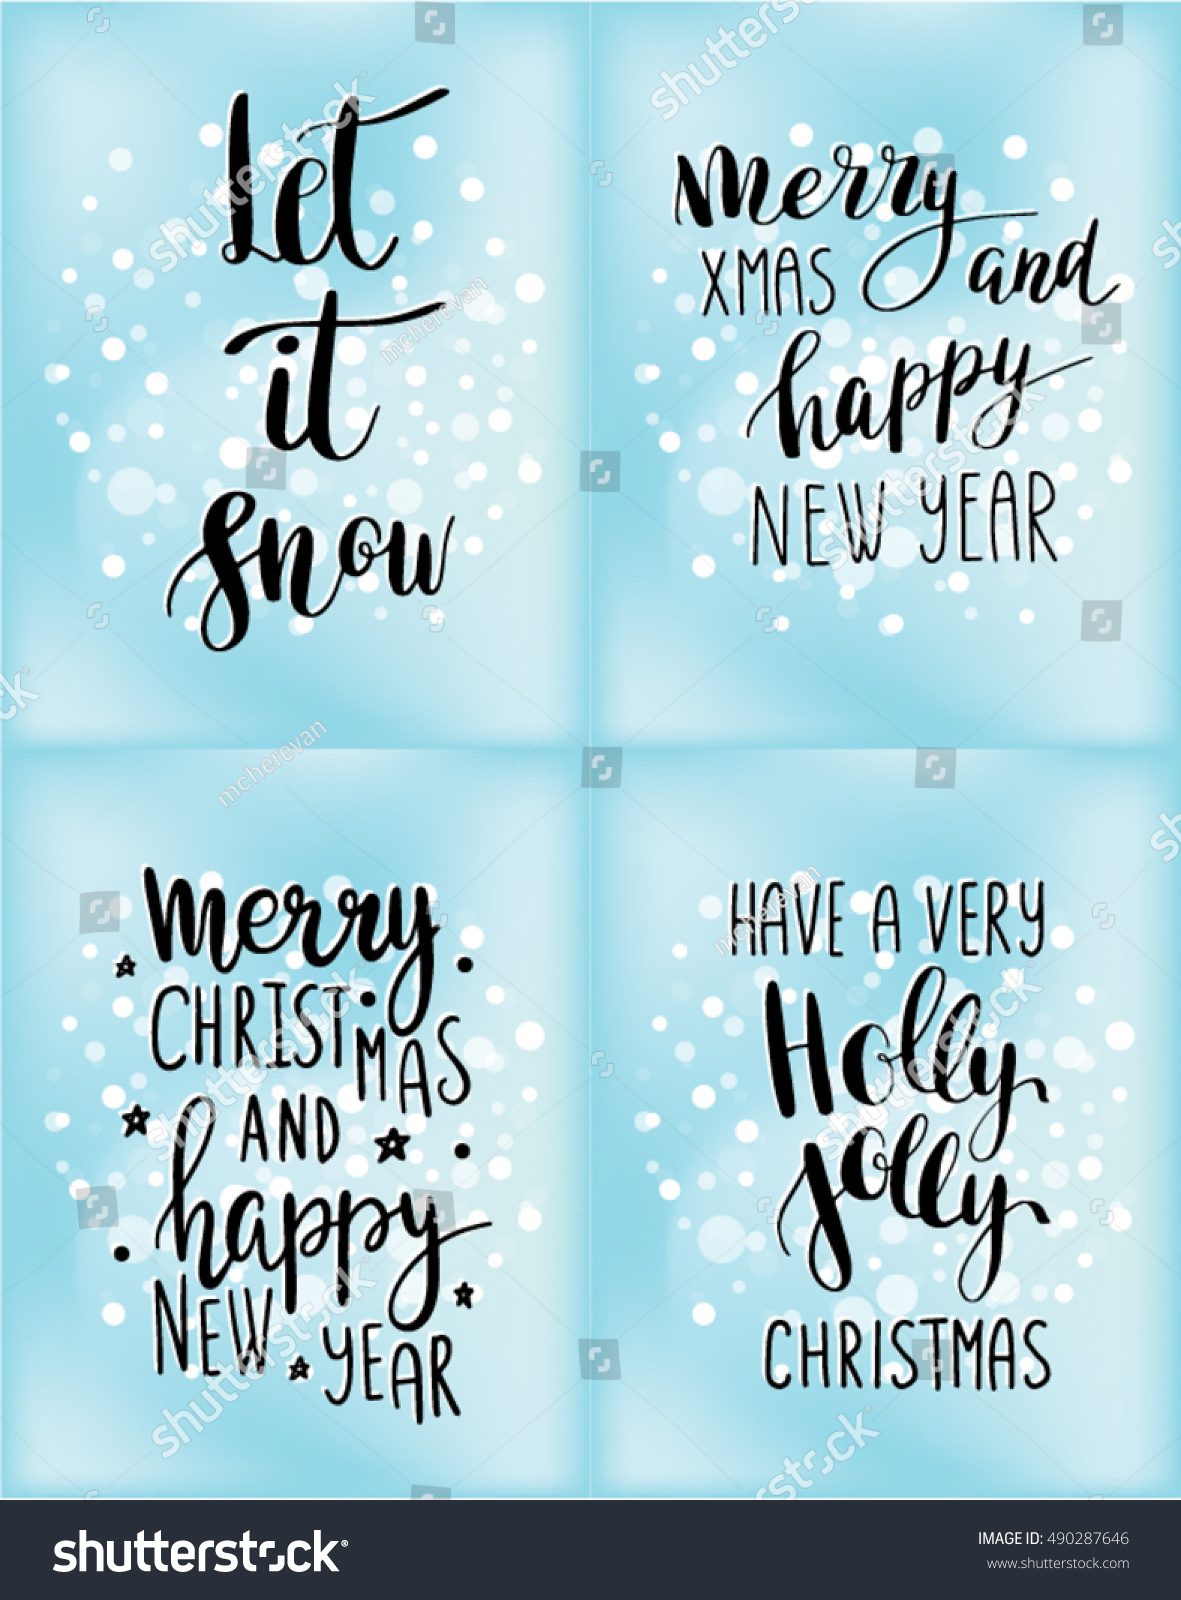 Set of Christmas cards with winter holidays quotes and phrases Let it snow Merry